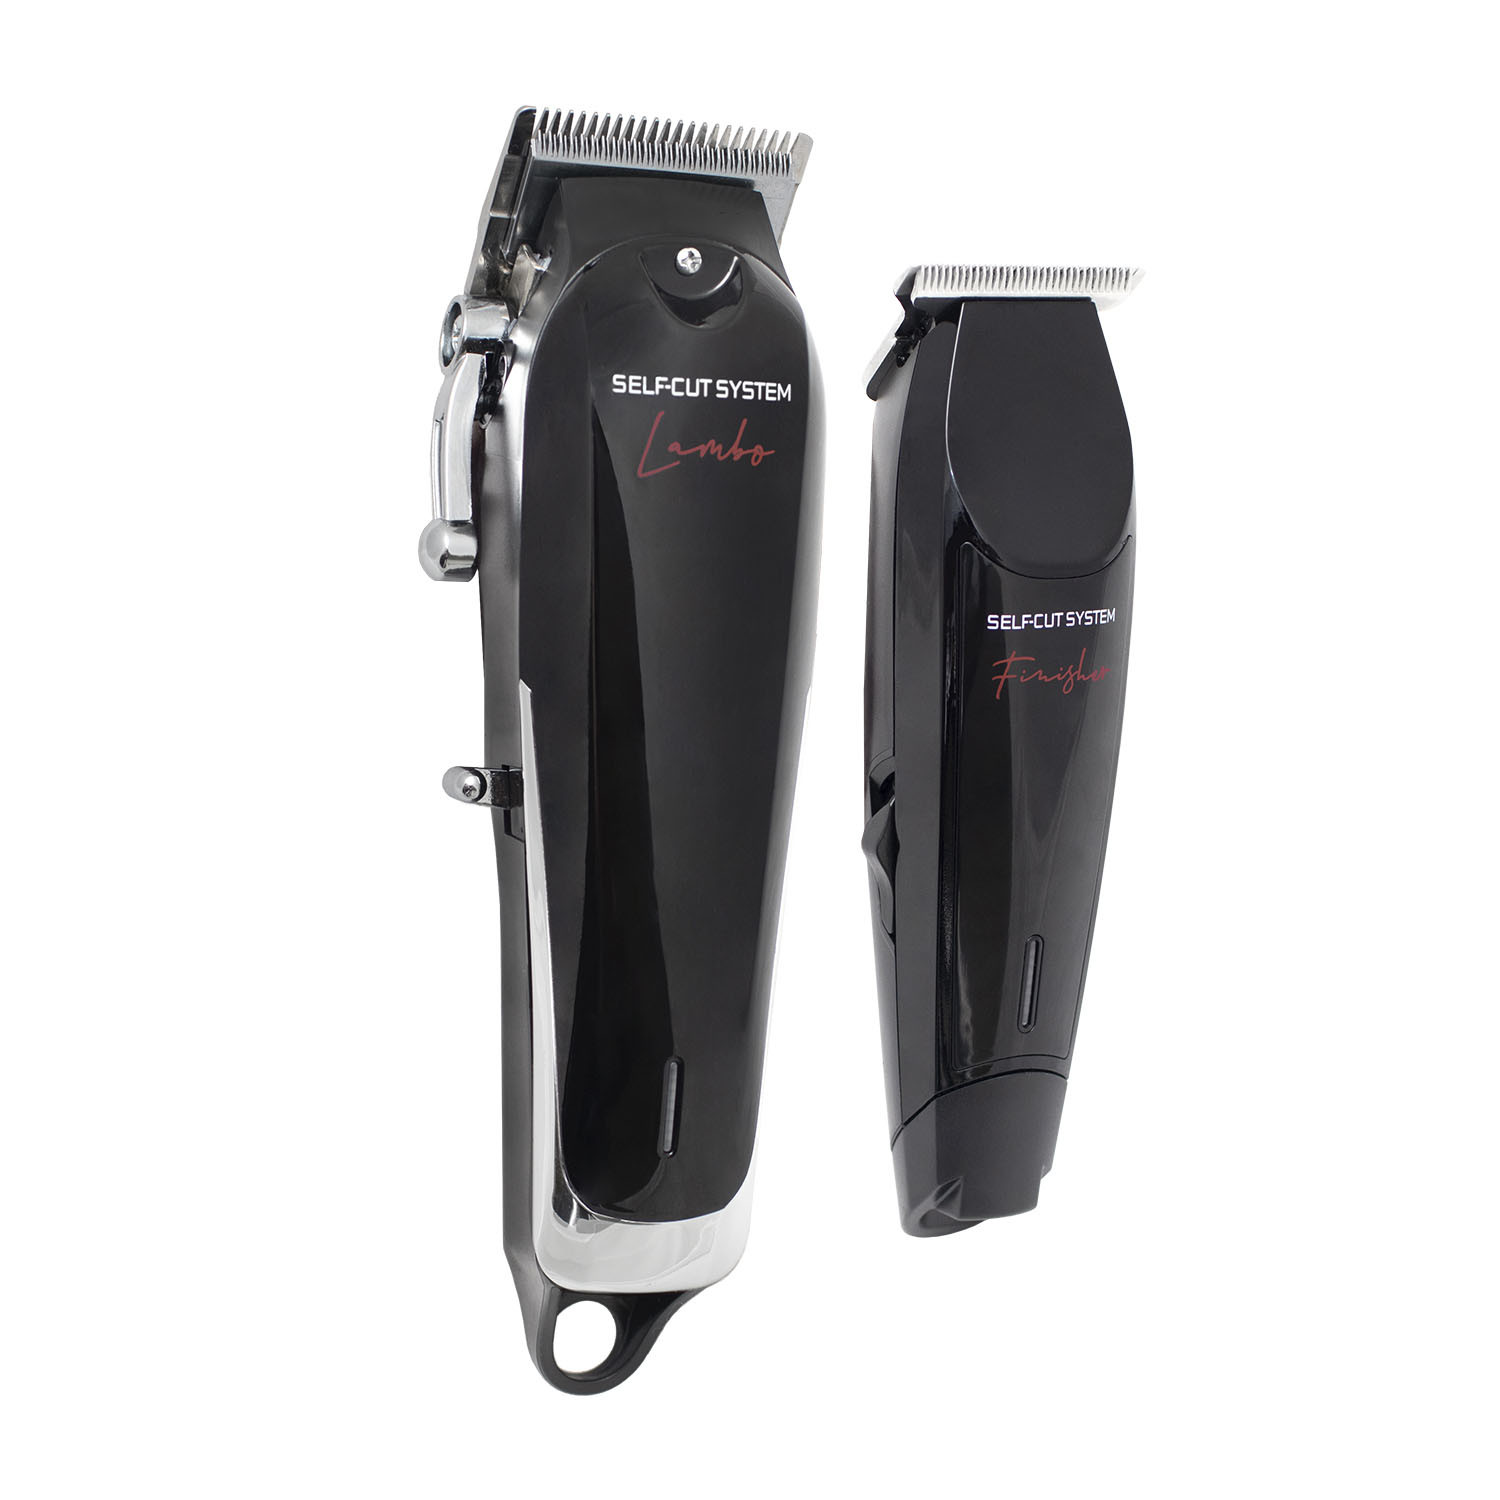 Self Cut System Heaven Lights Kit With Clippers Self Cut System 